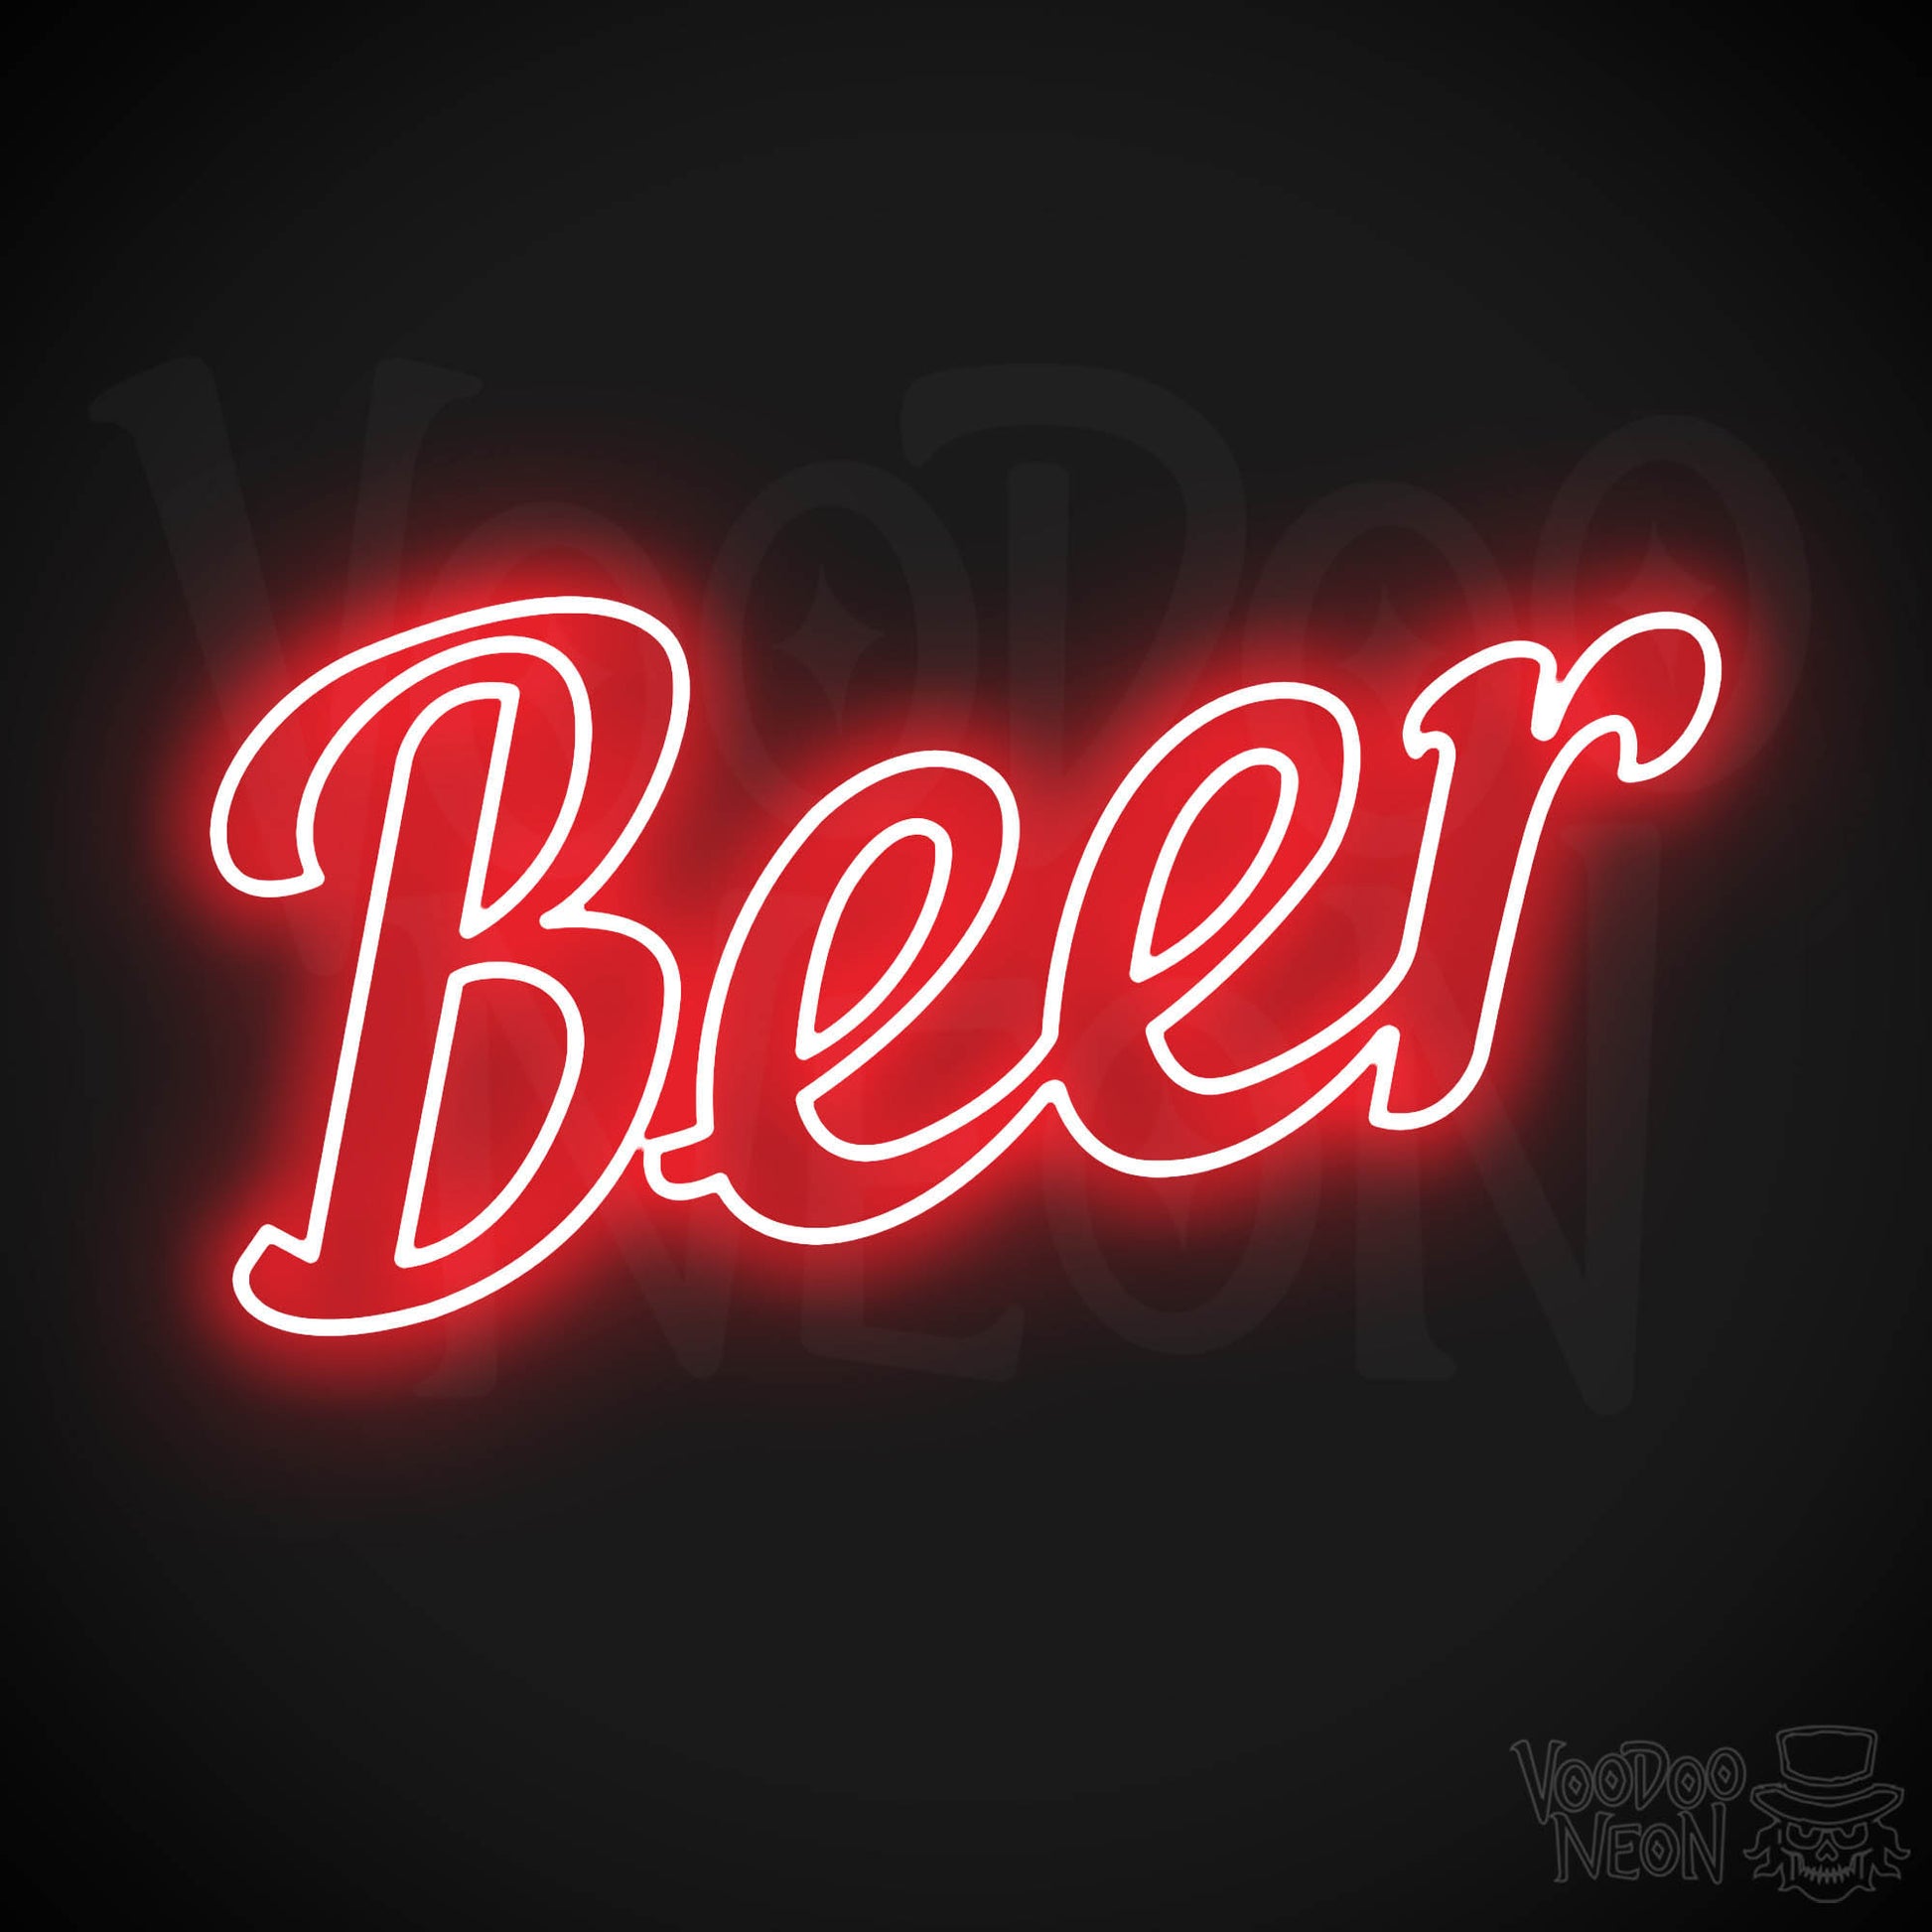 Beer LED Neon - Red